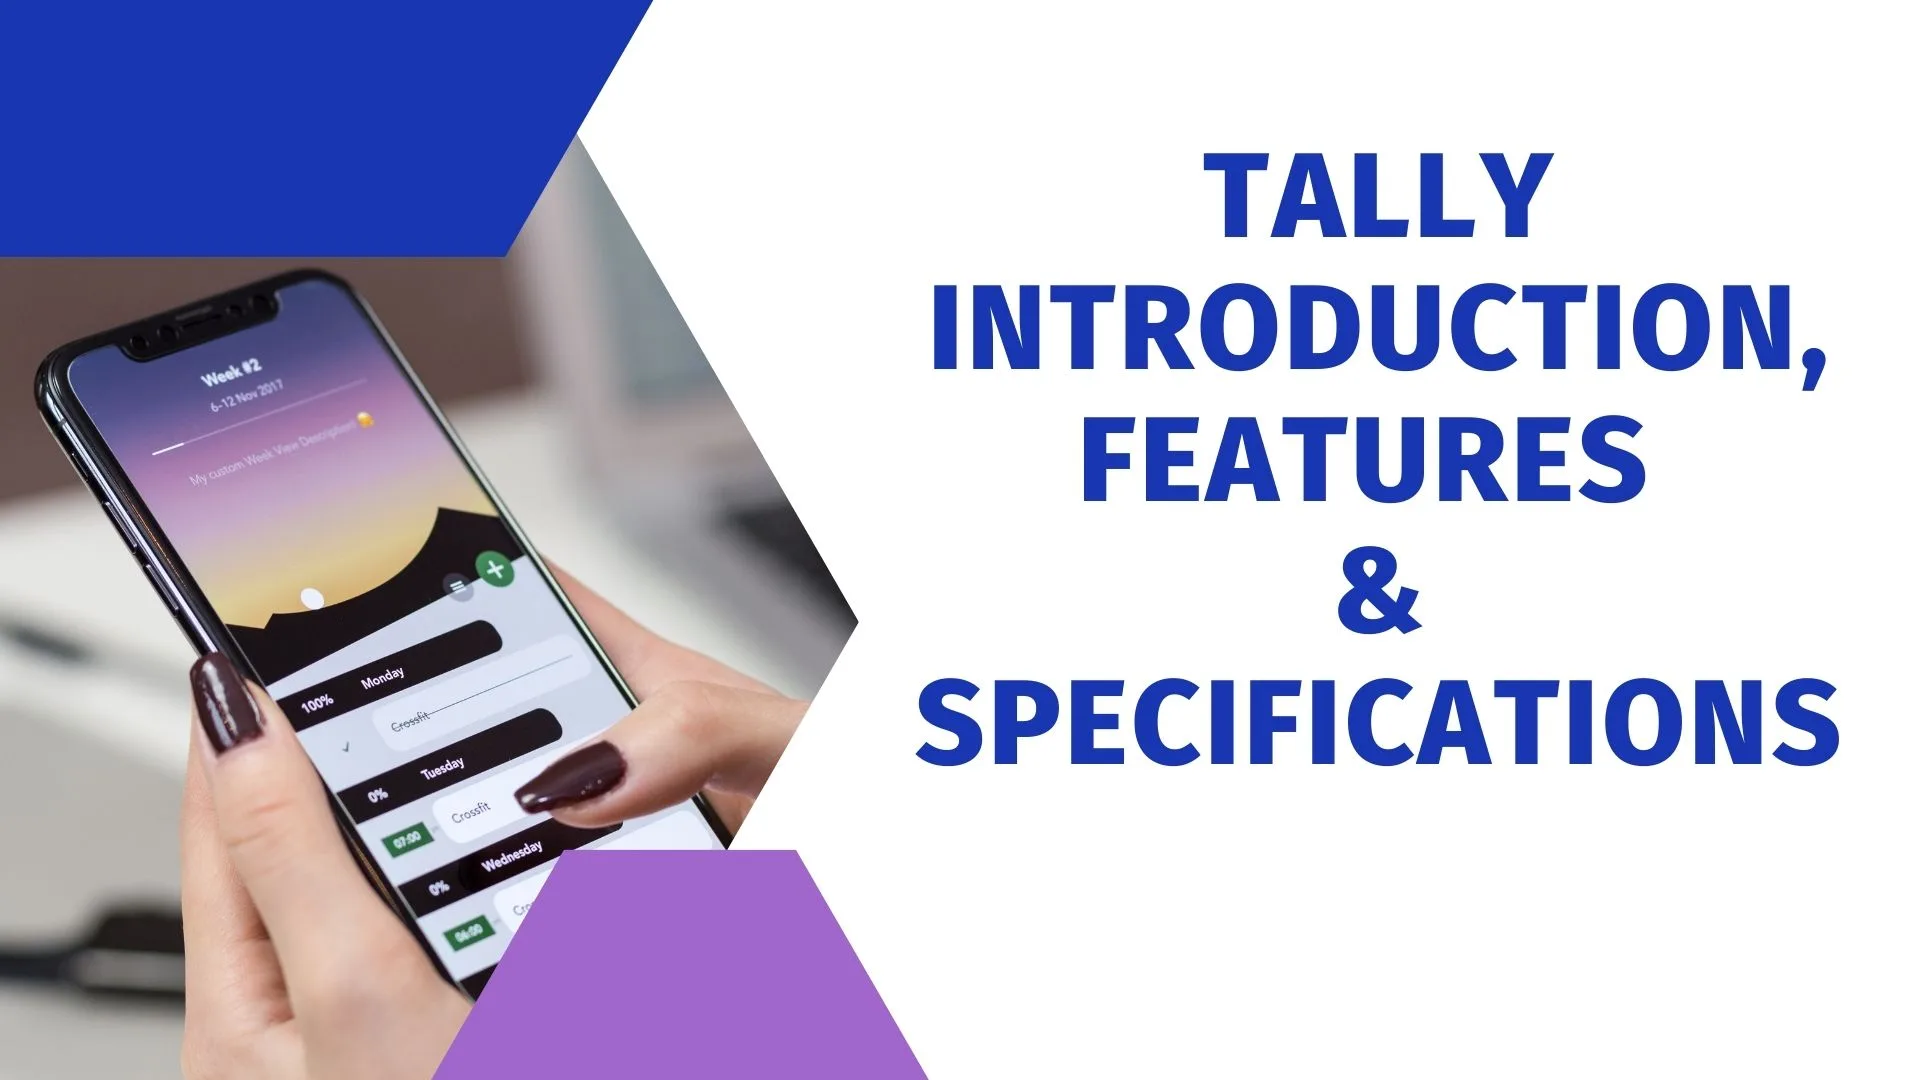 Tally Introduction, Features & Specifications